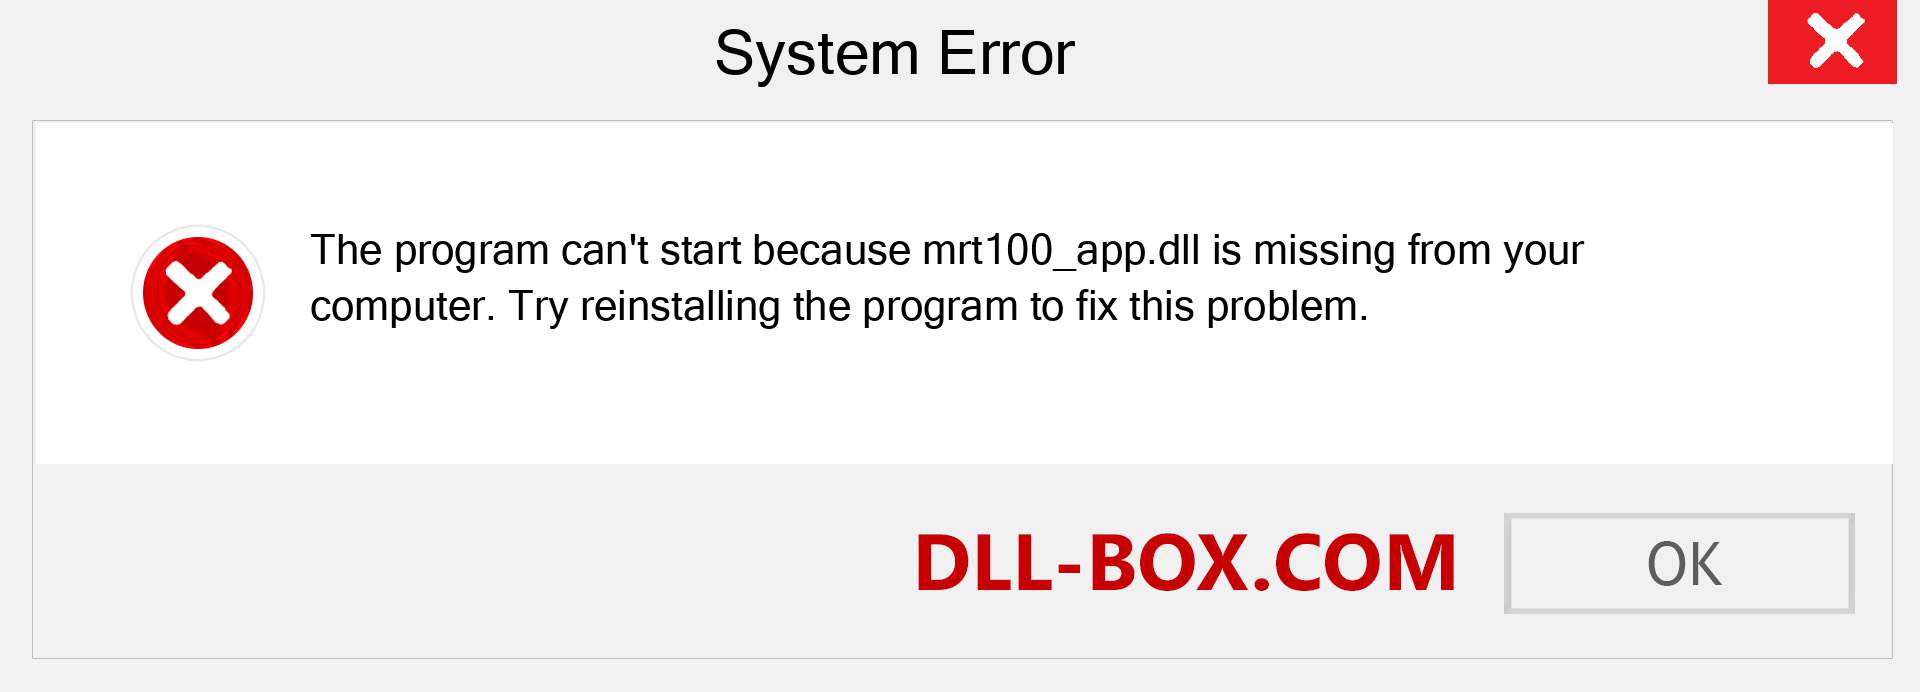  mrt100_app.dll file is missing?. Download for Windows 7, 8, 10 - Fix  mrt100_app dll Missing Error on Windows, photos, images